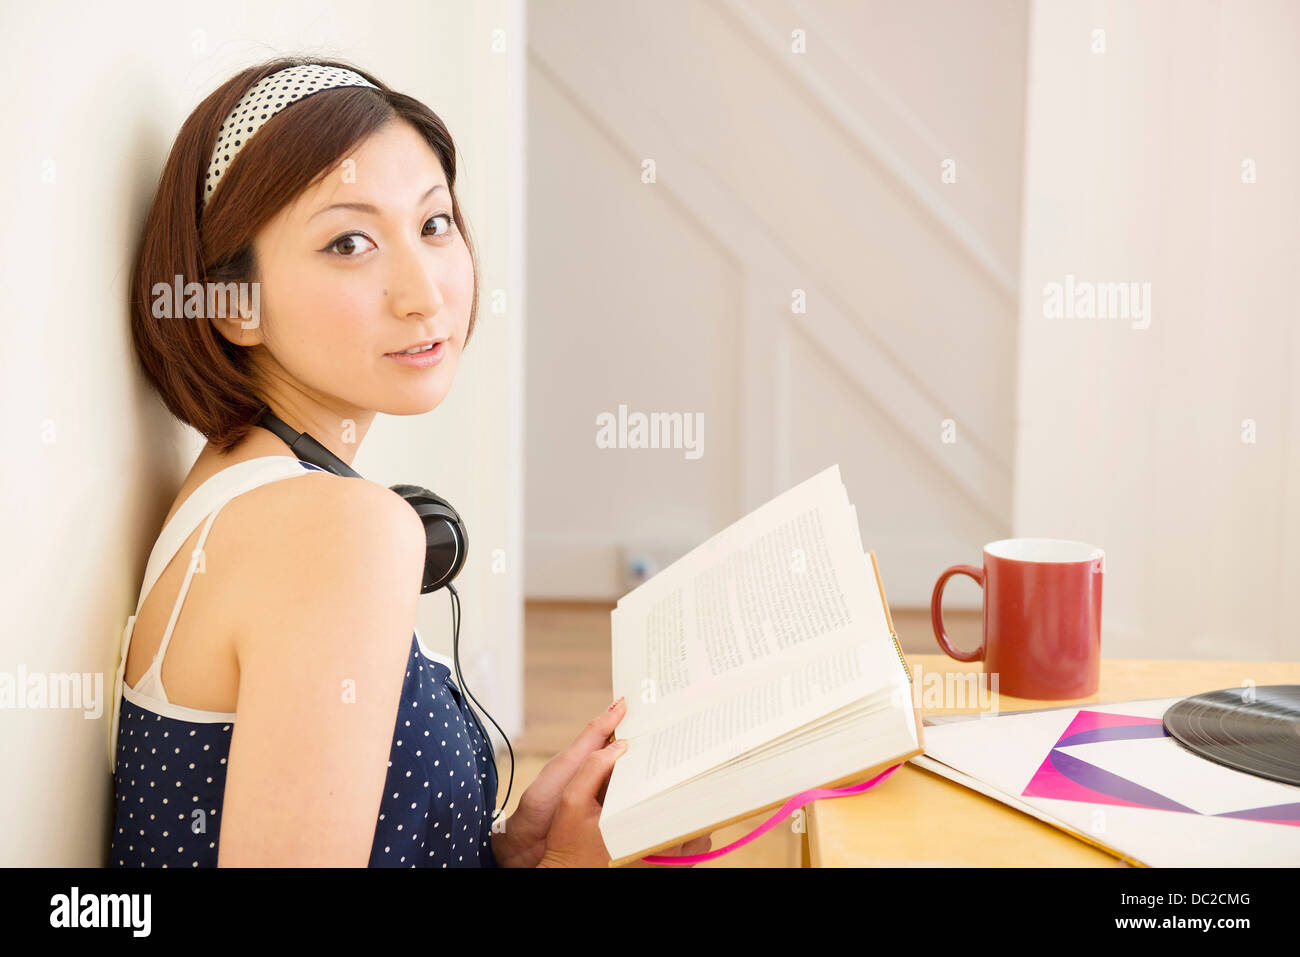 Woman looking up from book Stock Photo